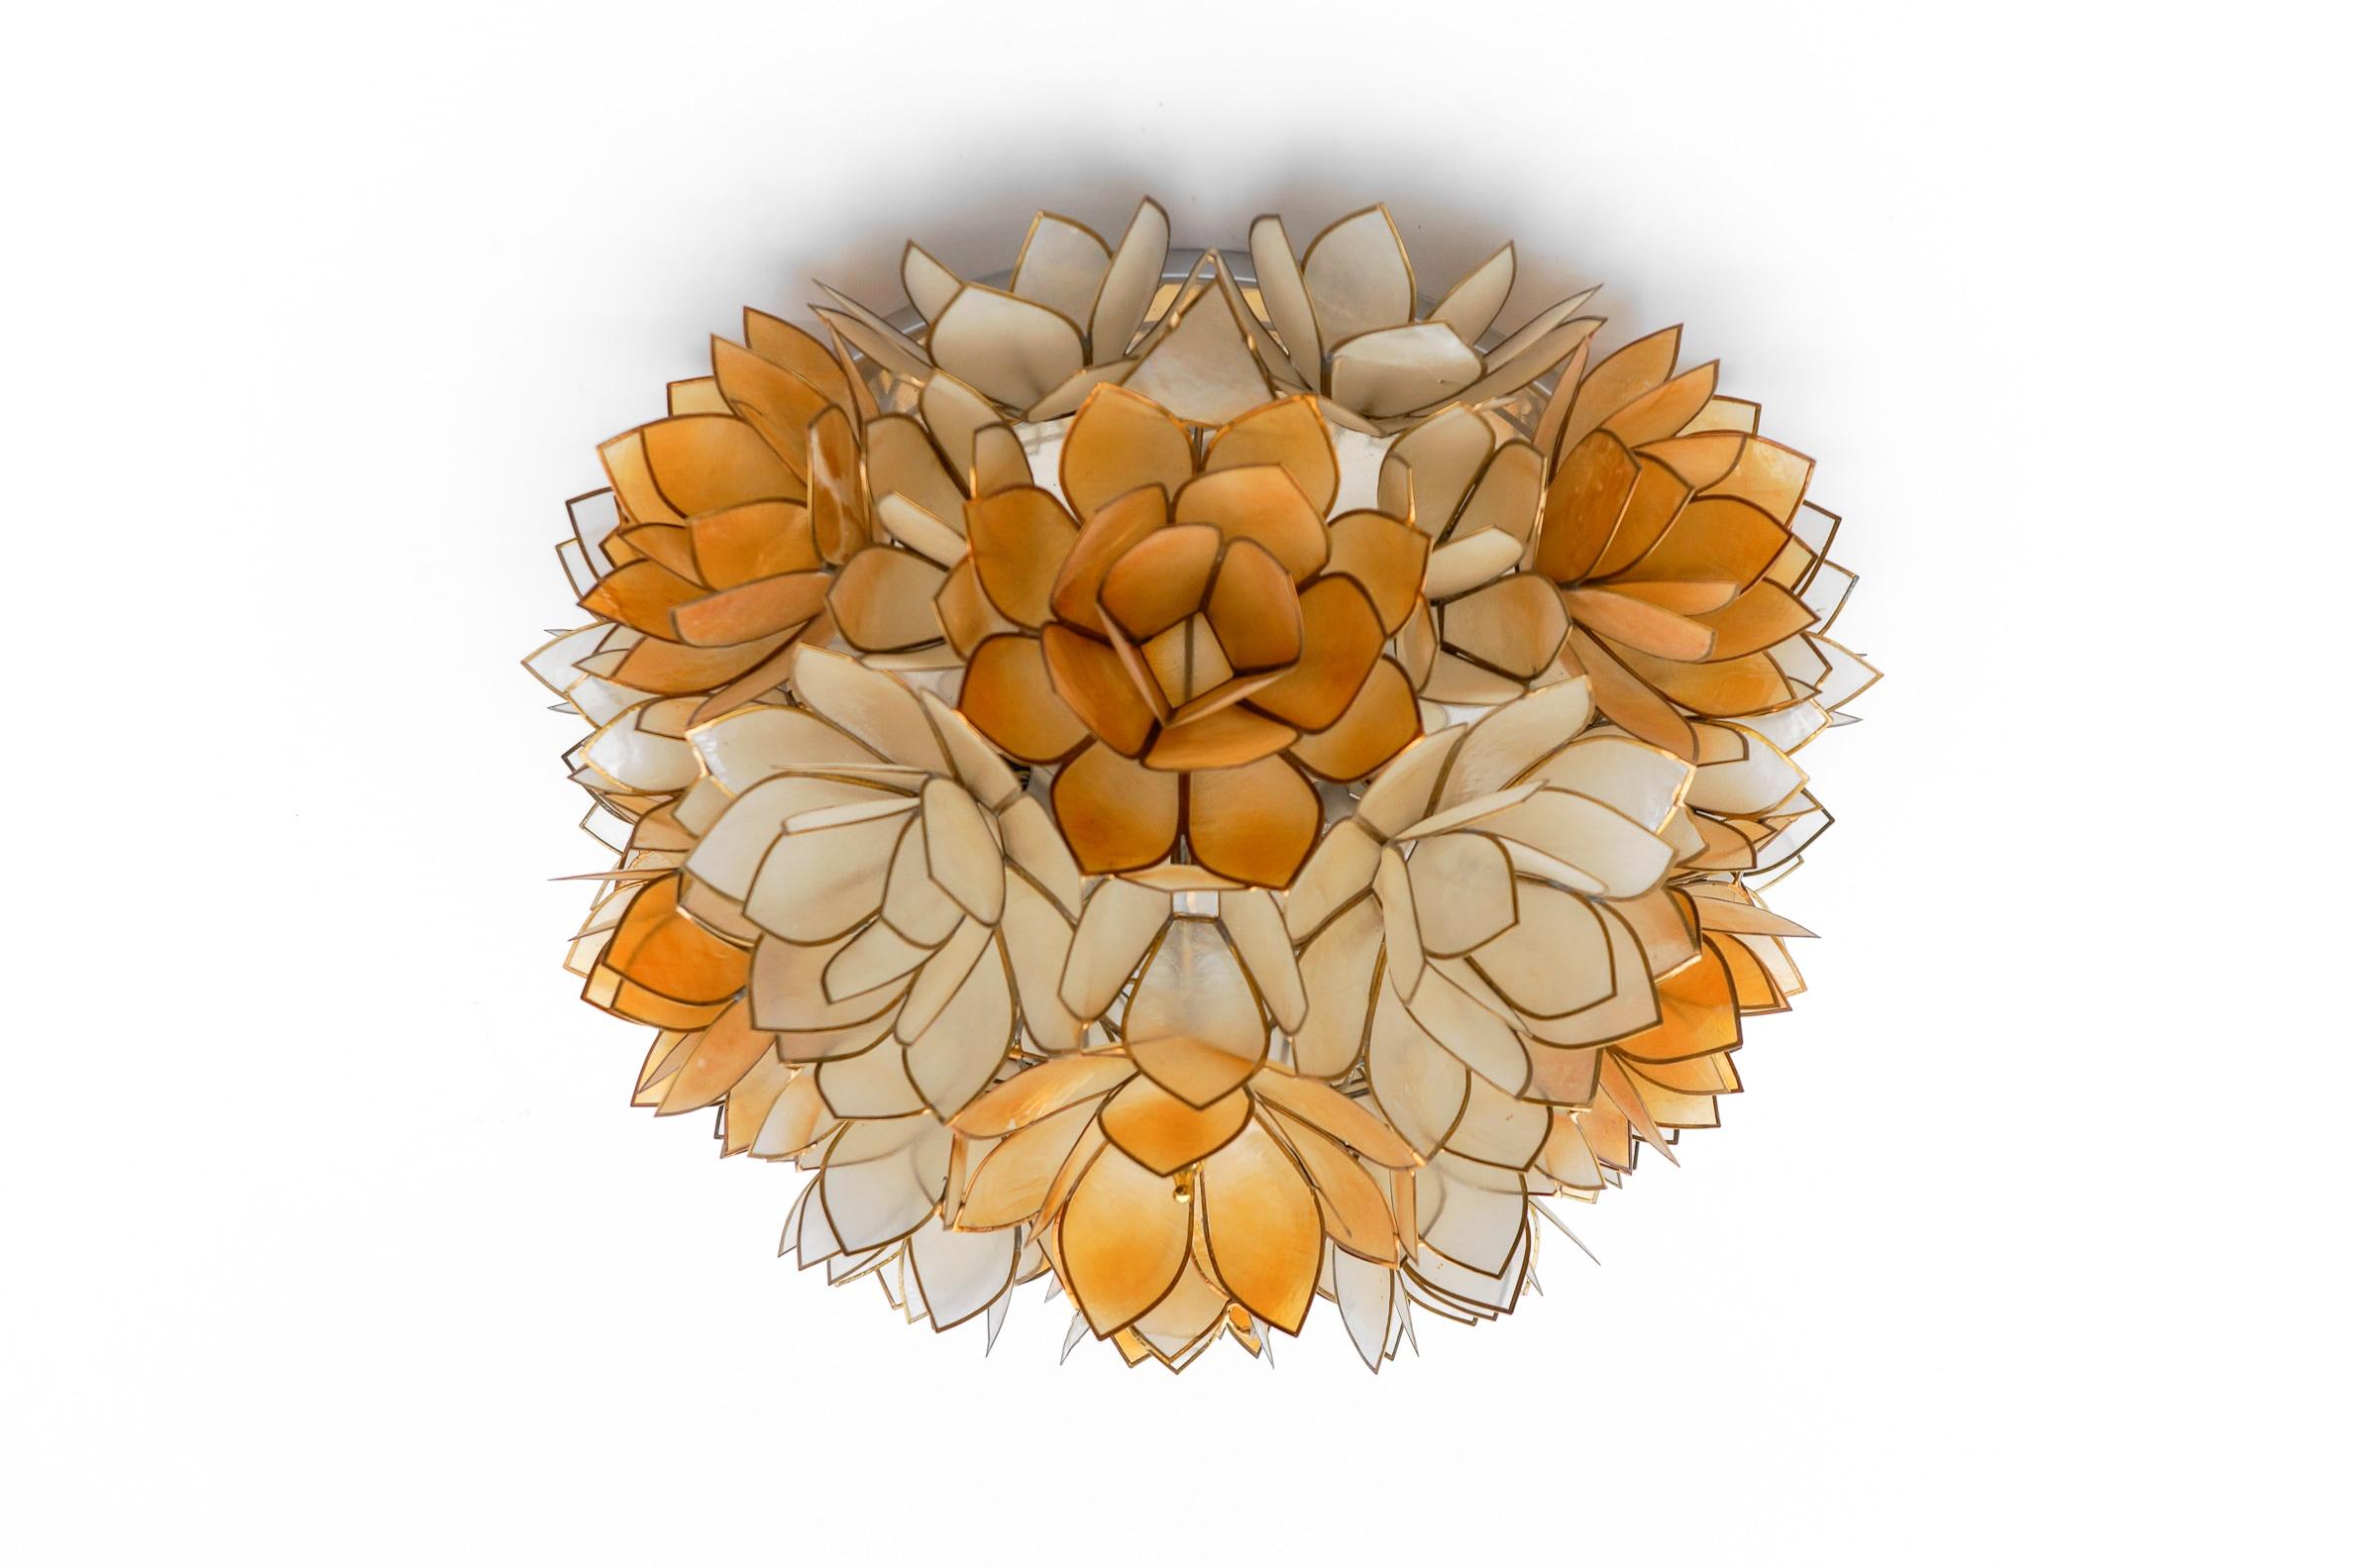 German Flower Spherical Wall or Ceiling Lamps Made of Mother-of-Pearl in Orange, 1960s For Sale